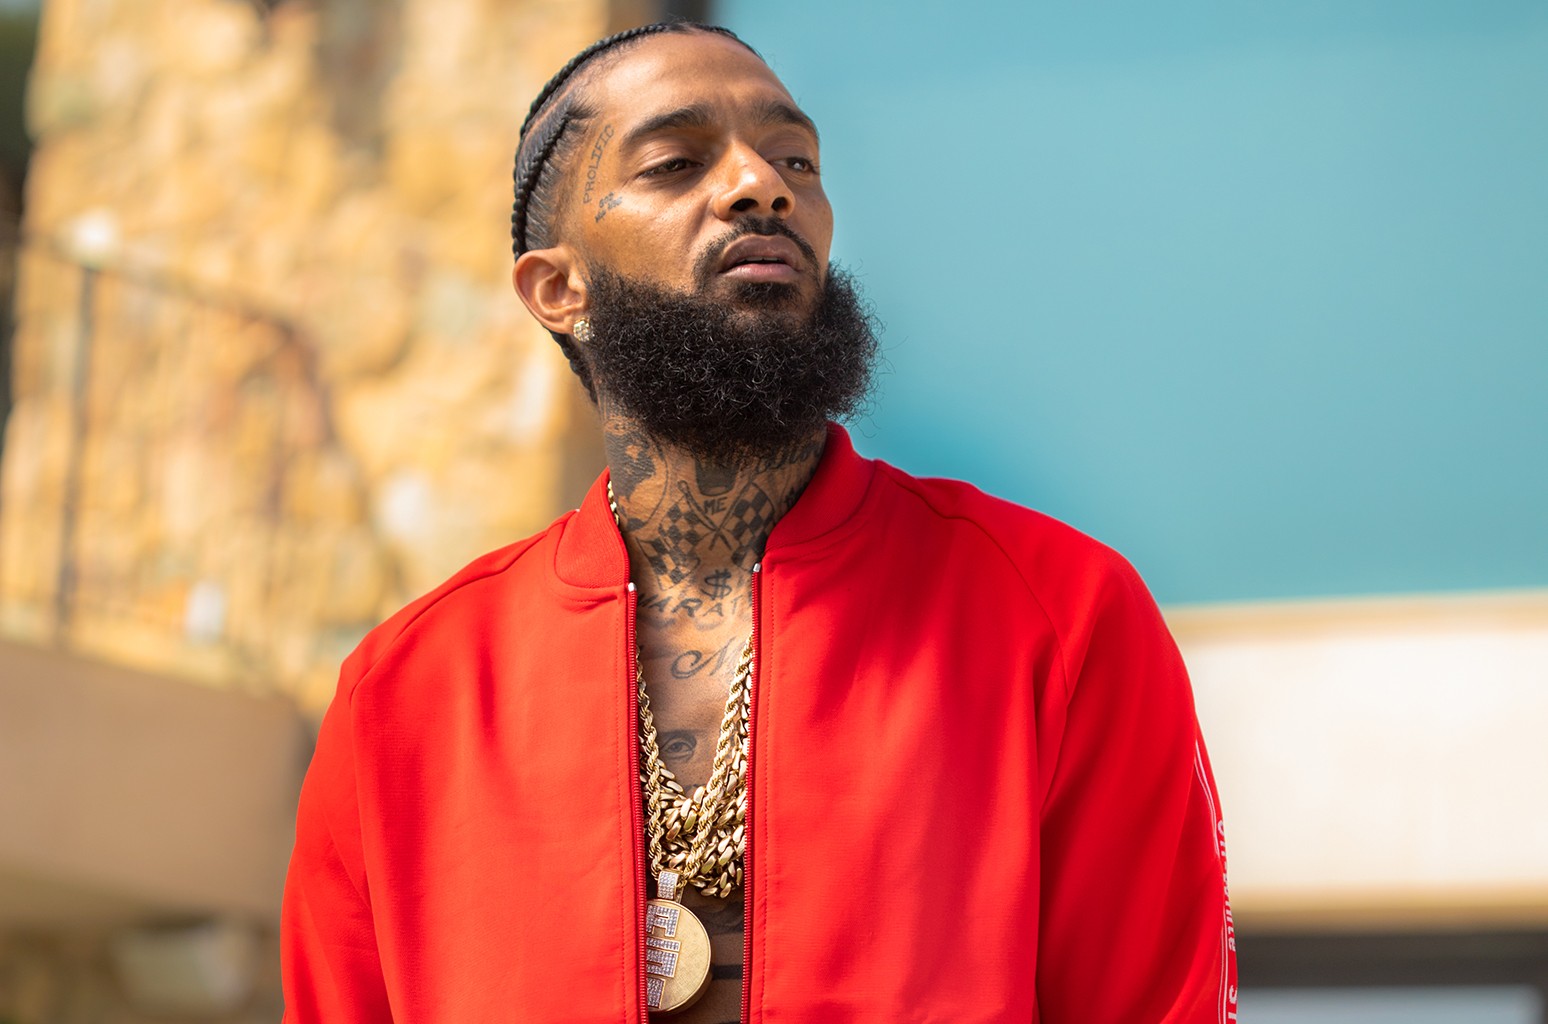 Nipsey Hussle Honored With Star On Hollywood Walk Of Fame